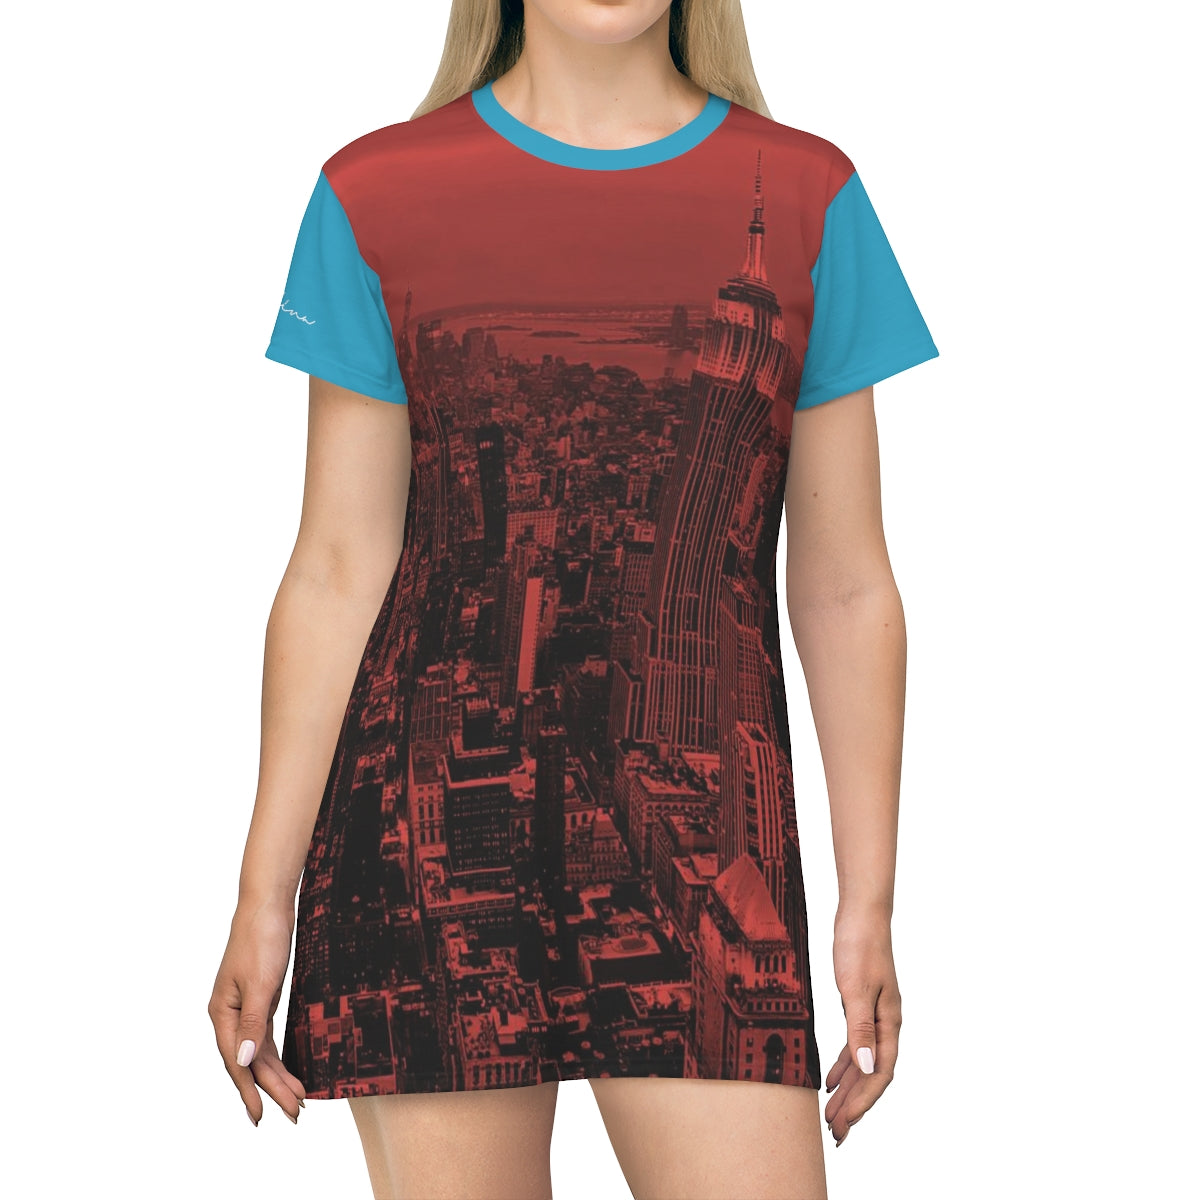 Shirtdress, Turquoise-Red NYC View